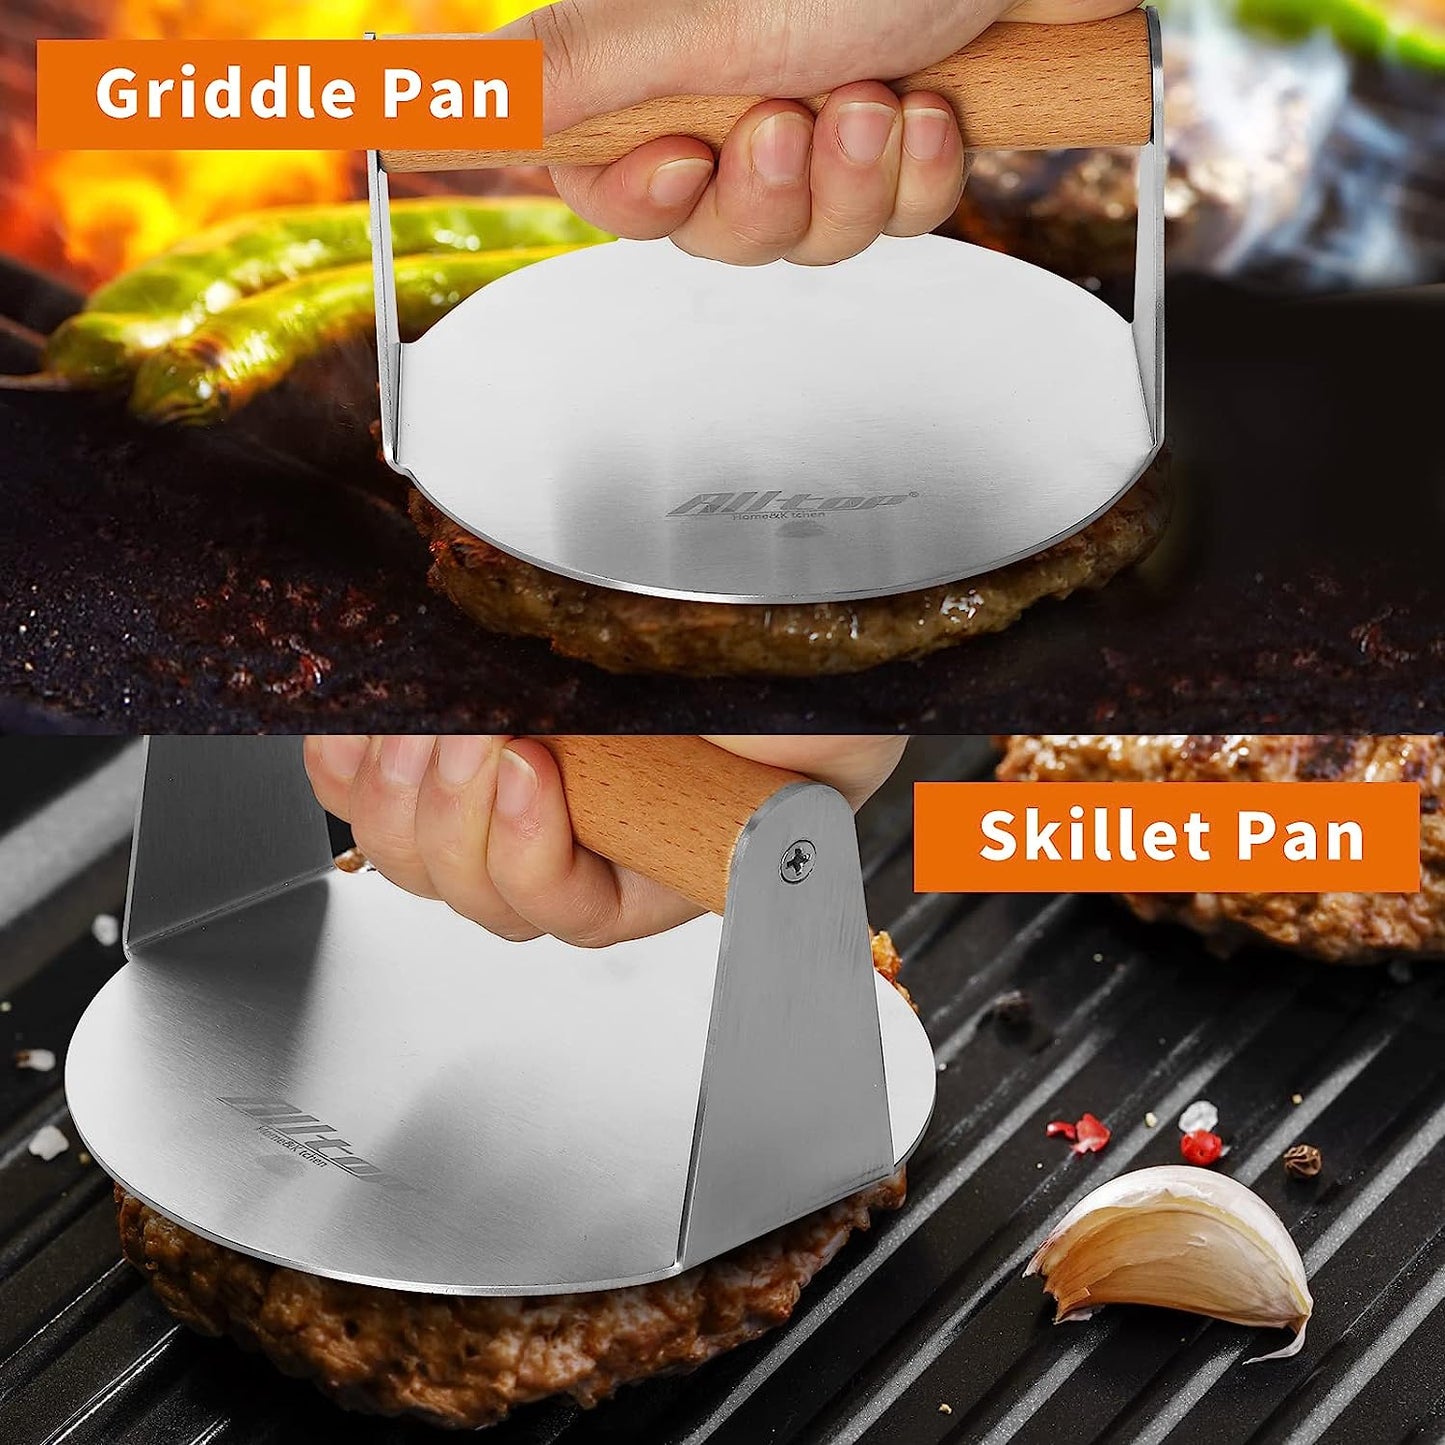 Smash Burger Press,Stainless Steel Non-Stick Hamburger Patty Maker for Flat Top Griddle,Bbq,Kitchen - 5.5” round Grill Tool,Wood Handle